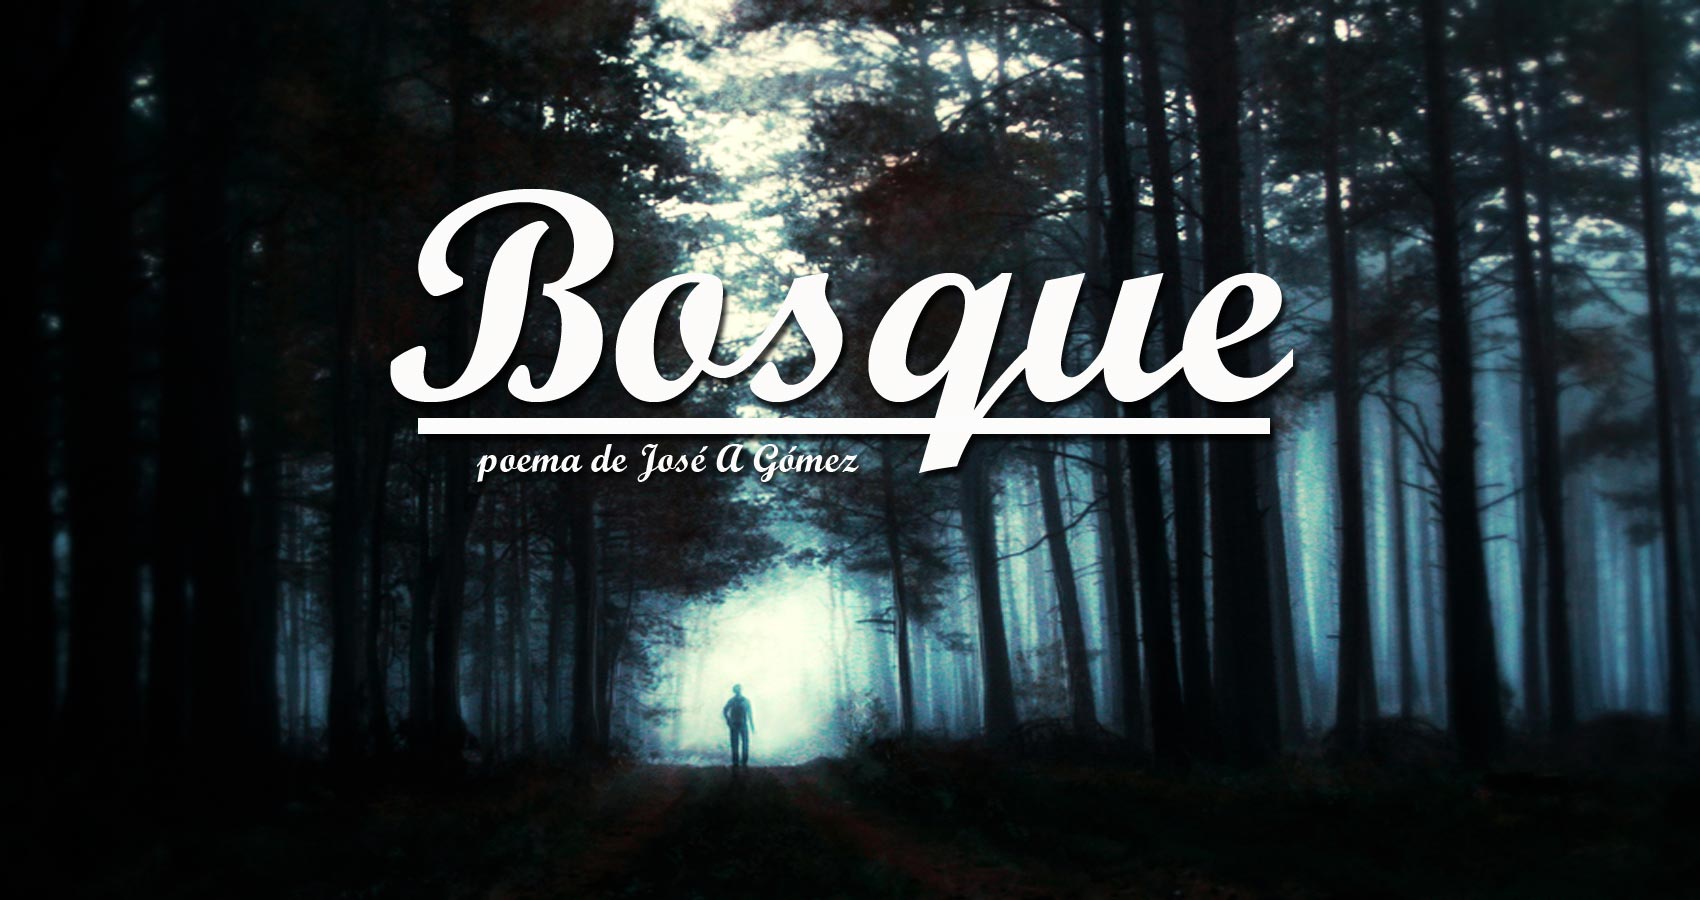 Bosque by Jose A Gomez at spillwords.com